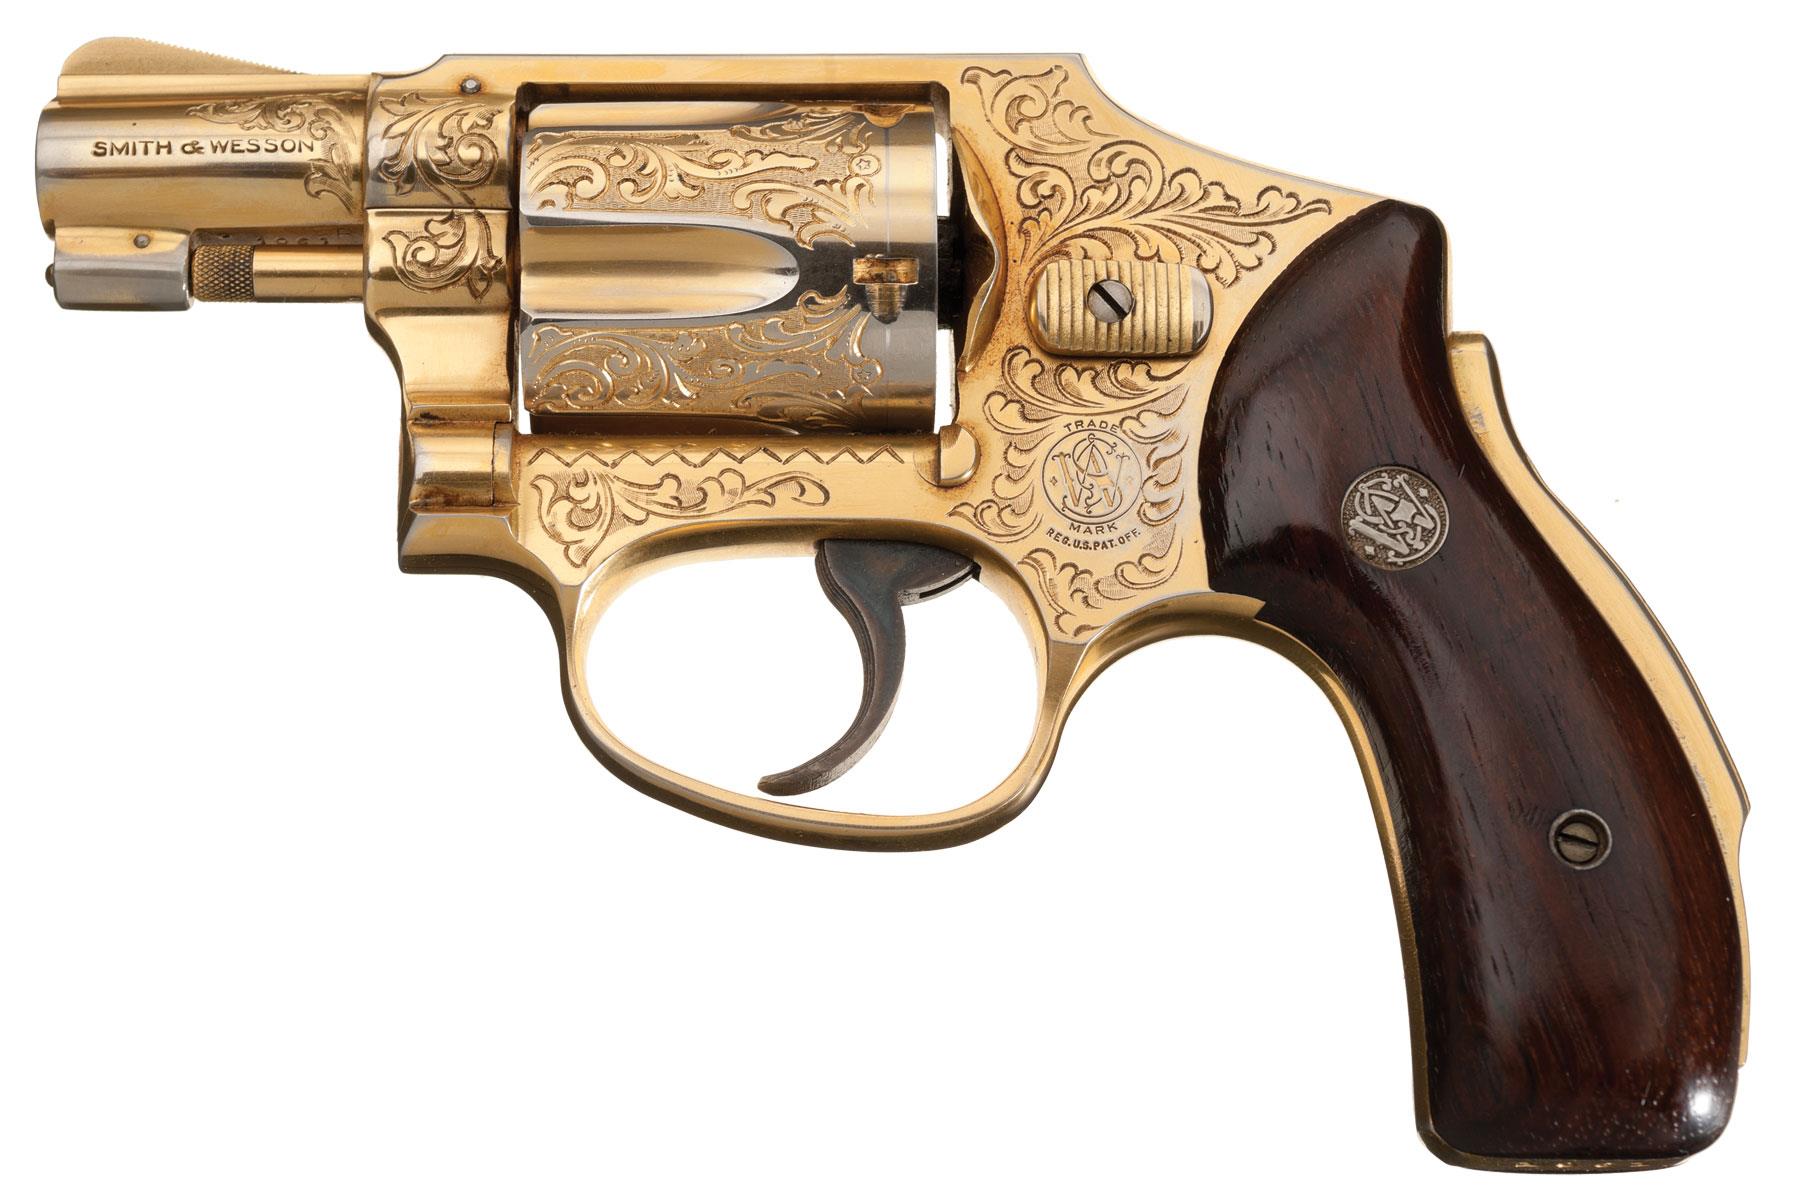 smith-wesson-38-safety-hammerless-revolver-38-s-w-special-rock